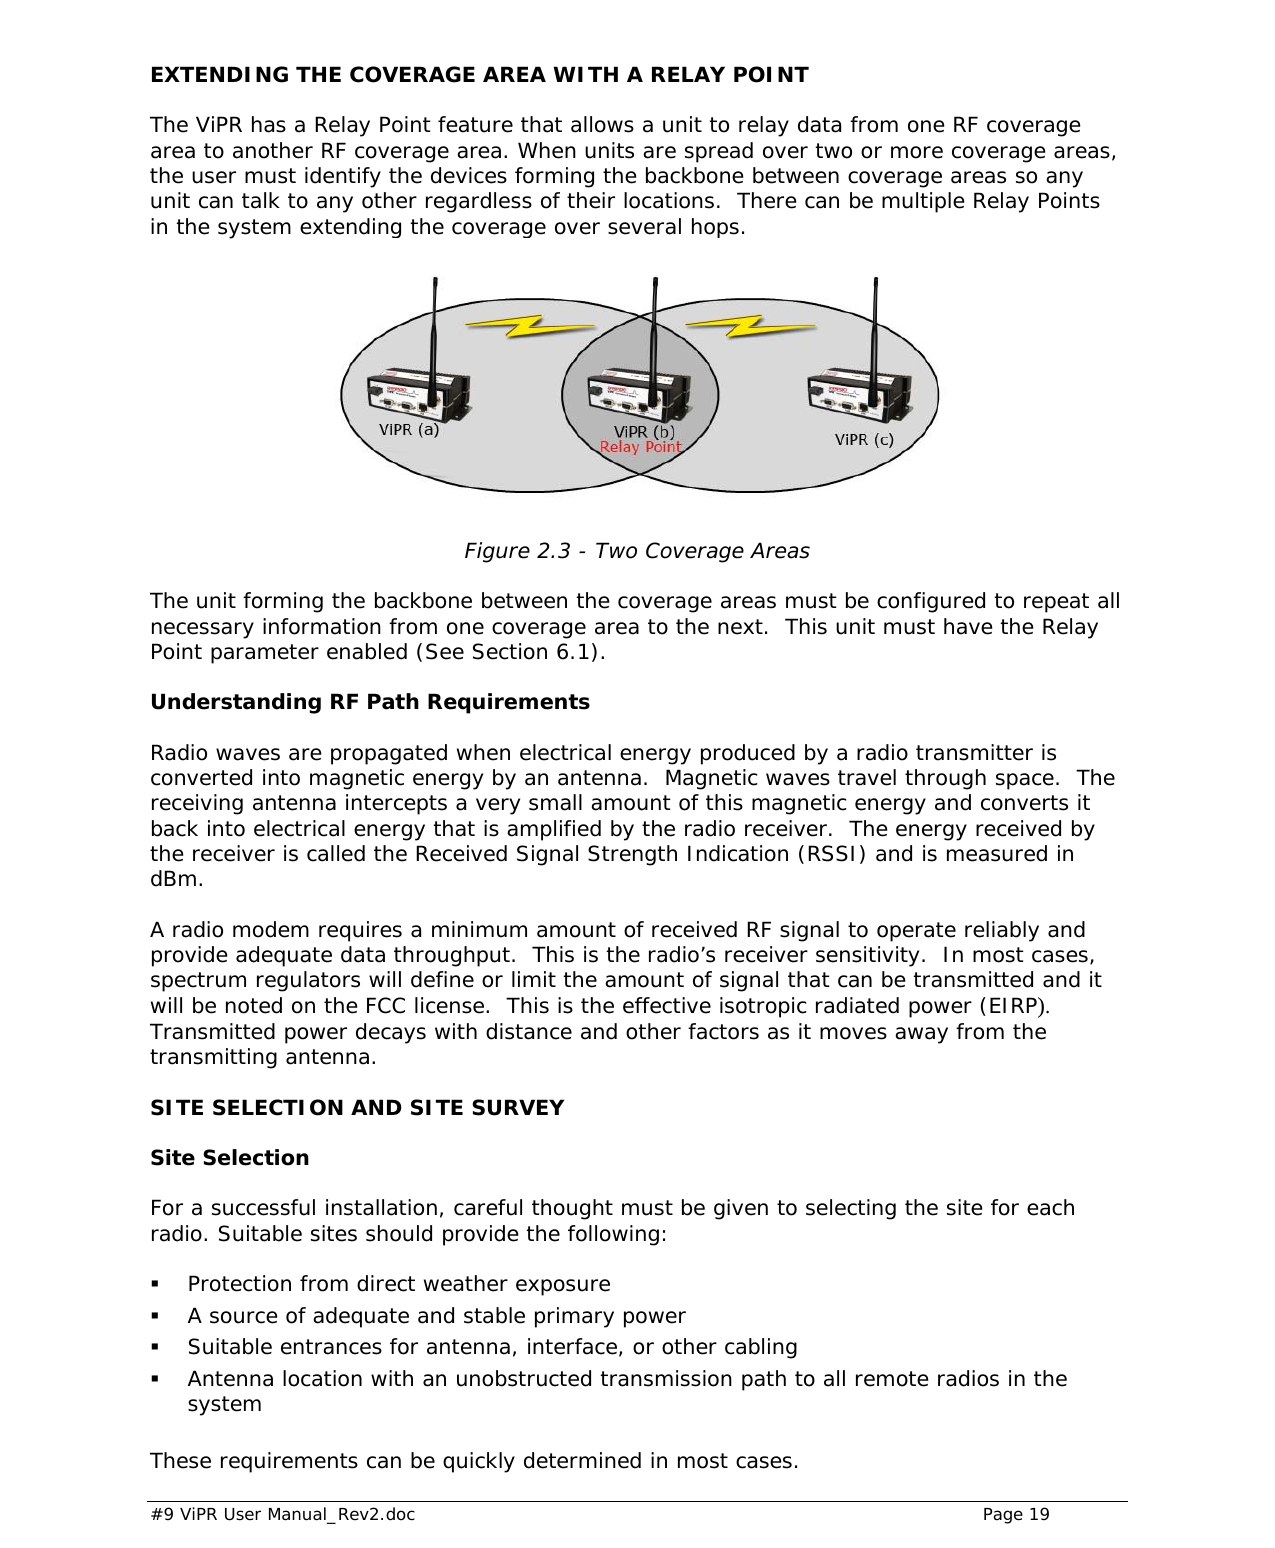  #9 ViPR User Manual_Rev2.doc    Page 19 EXTENDING THE COVERAGE AREA WITH A RELAY POINT The ViPR has a Relay Point feature that allows a unit to relay data from one RF coverage area to another RF coverage area. When units are spread over two or more coverage areas, the user must identify the devices forming the backbone between coverage areas so any unit can talk to any other regardless of their locations.  There can be multiple Relay Points in the system extending the coverage over several hops.  Figure 2.3 - Two Coverage Areas  The unit forming the backbone between the coverage areas must be configured to repeat all necessary information from one coverage area to the next.  This unit must have the Relay Point parameter enabled (See Section 6.1). Understanding RF Path Requirements Radio waves are propagated when electrical energy produced by a radio transmitter is converted into magnetic energy by an antenna.  Magnetic waves travel through space.  The receiving antenna intercepts a very small amount of this magnetic energy and converts it back into electrical energy that is amplified by the radio receiver.  The energy received by the receiver is called the Received Signal Strength Indication (RSSI) and is measured in dBm.   A radio modem requires a minimum amount of received RF signal to operate reliably and provide adequate data throughput.  This is the radio’s receiver sensitivity.  In most cases, spectrum regulators will define or limit the amount of signal that can be transmitted and it will be noted on the FCC license.  This is the effective isotropic radiated power (EIRP).  Transmitted power decays with distance and other factors as it moves away from the transmitting antenna. SITE SELECTION AND SITE SURVEY Site Selection For a successful installation, careful thought must be given to selecting the site for each radio. Suitable sites should provide the following:   Protection from direct weather exposure  A source of adequate and stable primary power  Suitable entrances for antenna, interface, or other cabling  Antenna location with an unobstructed transmission path to all remote radios in the system  These requirements can be quickly determined in most cases. 